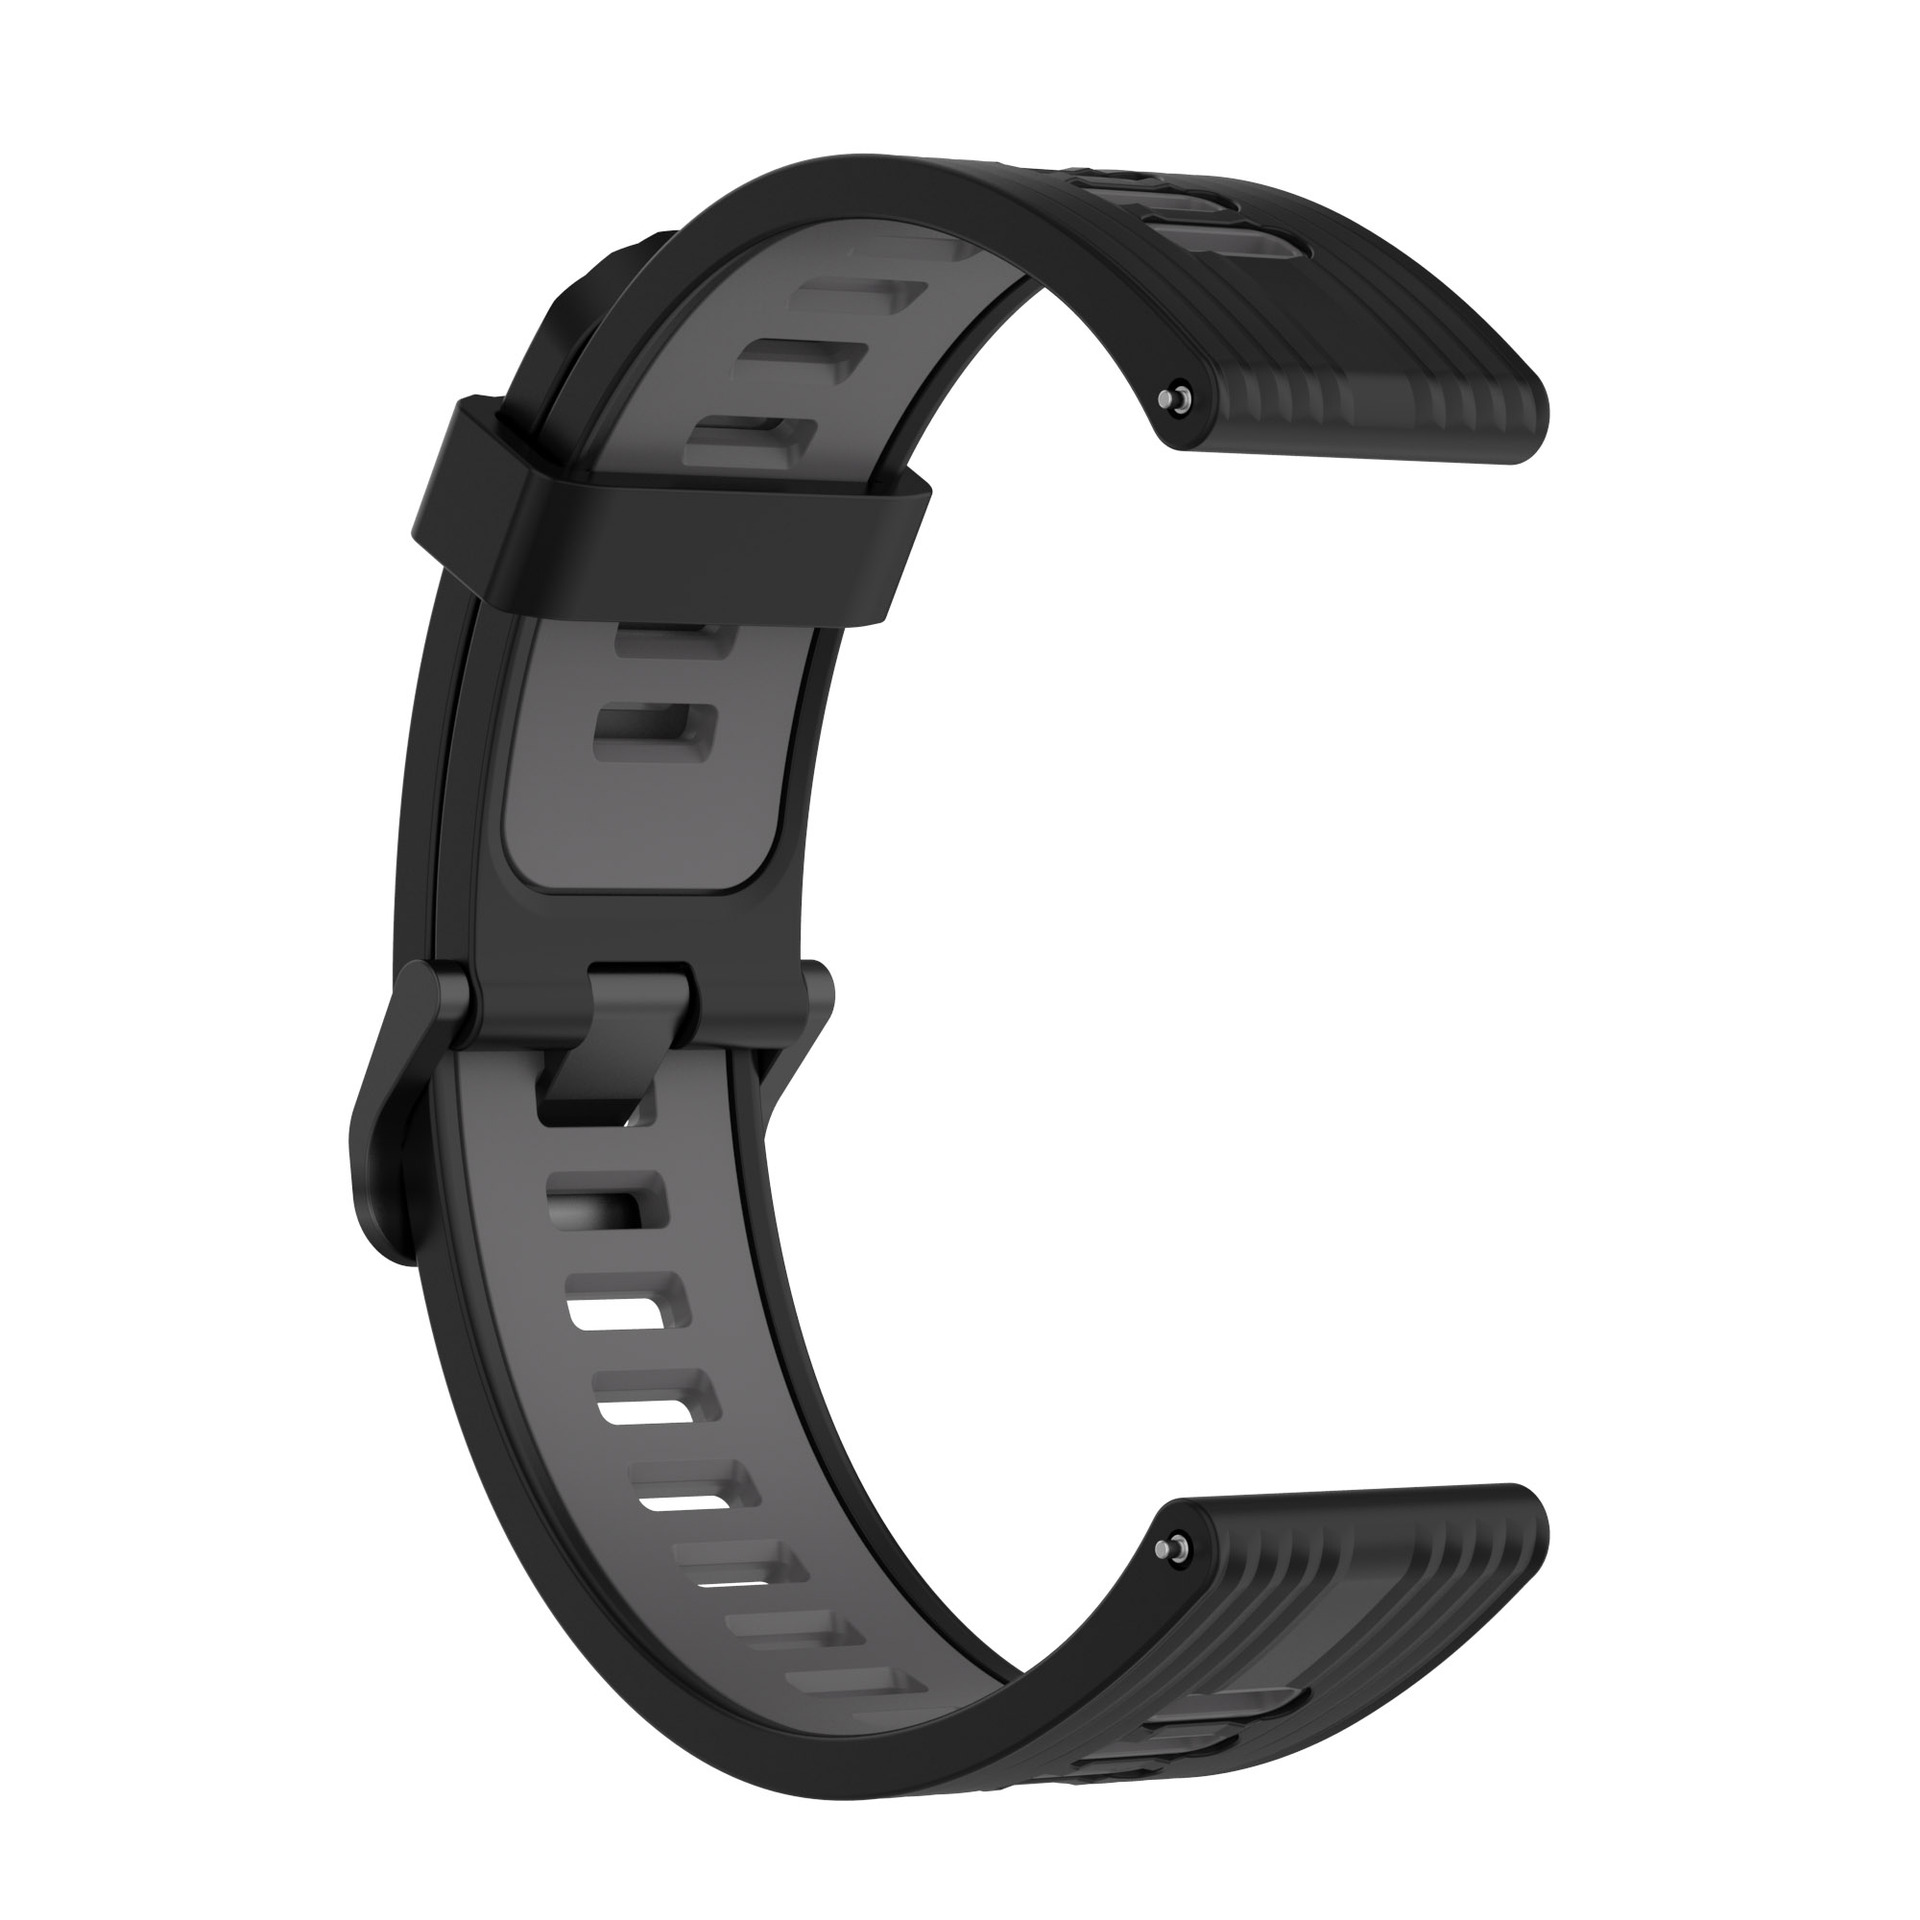 Bakeey-2022mm-Width-Comfortable-Breathable-Sweat-proof-Soft-Silicone-Watch-Band-Strap-Replacement-fo-1926926-17